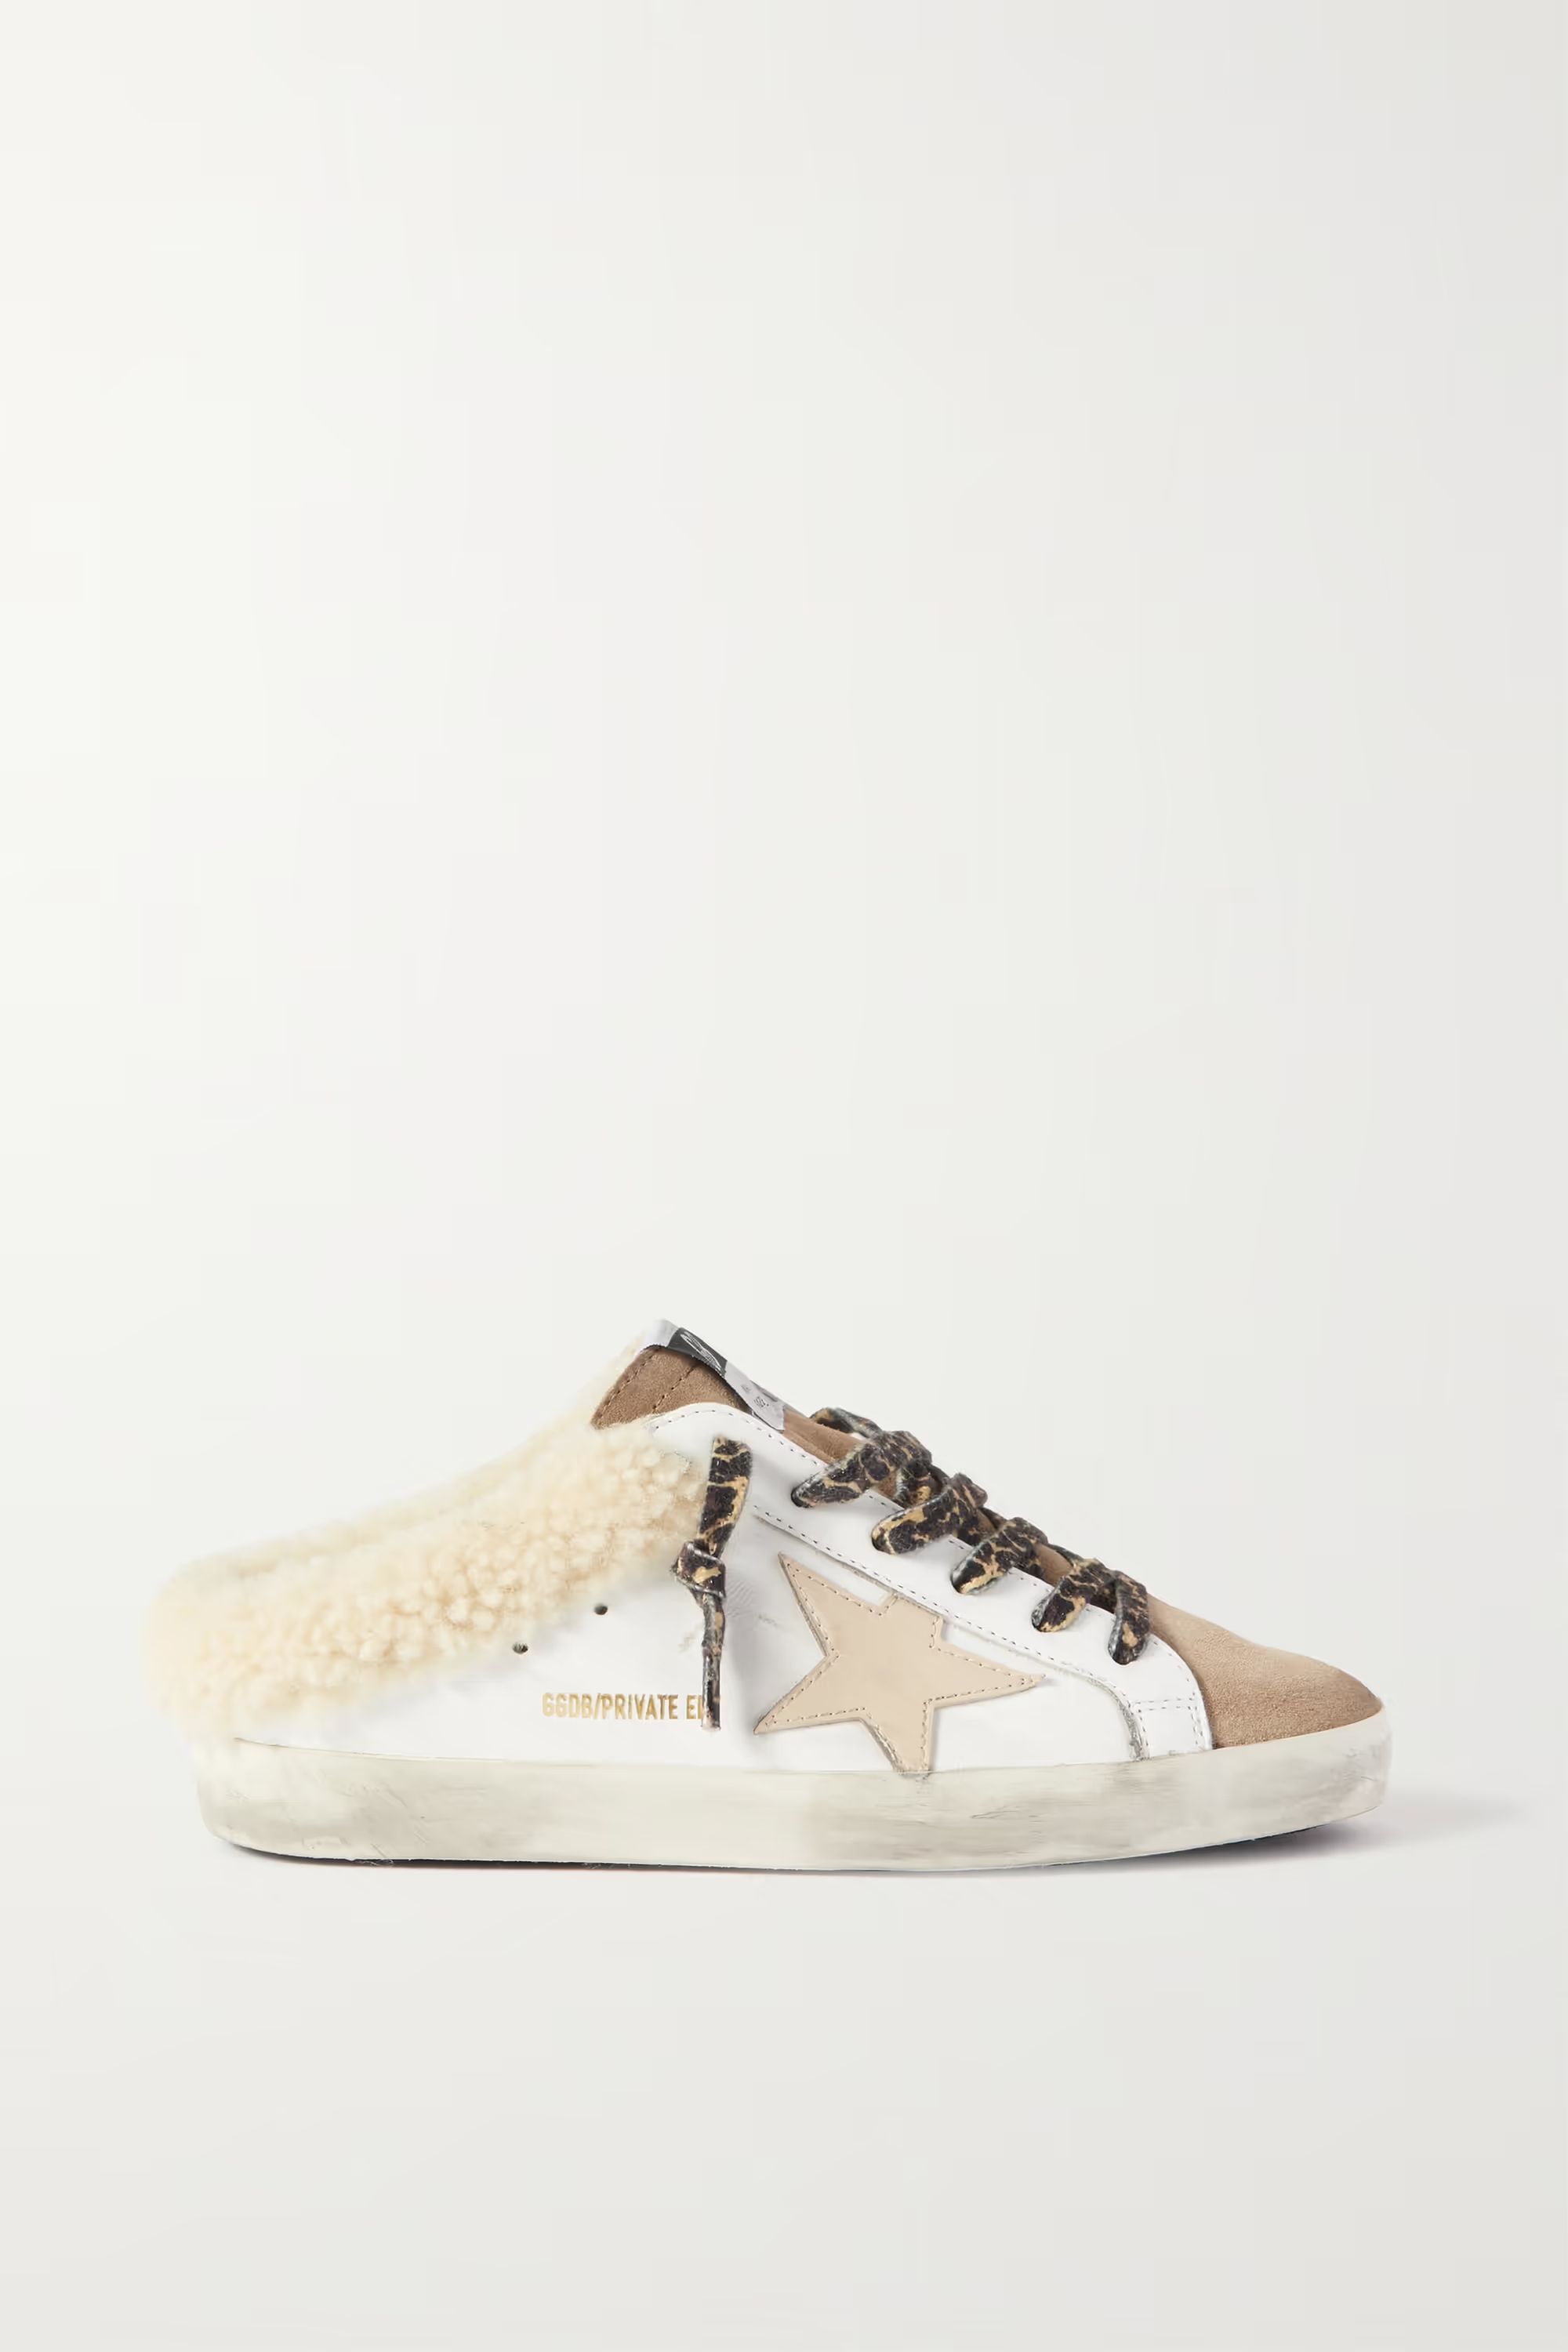 Superstar Sabot shearling-lined distressed leather and suede slip-on sneakers | NET-A-PORTER (US)